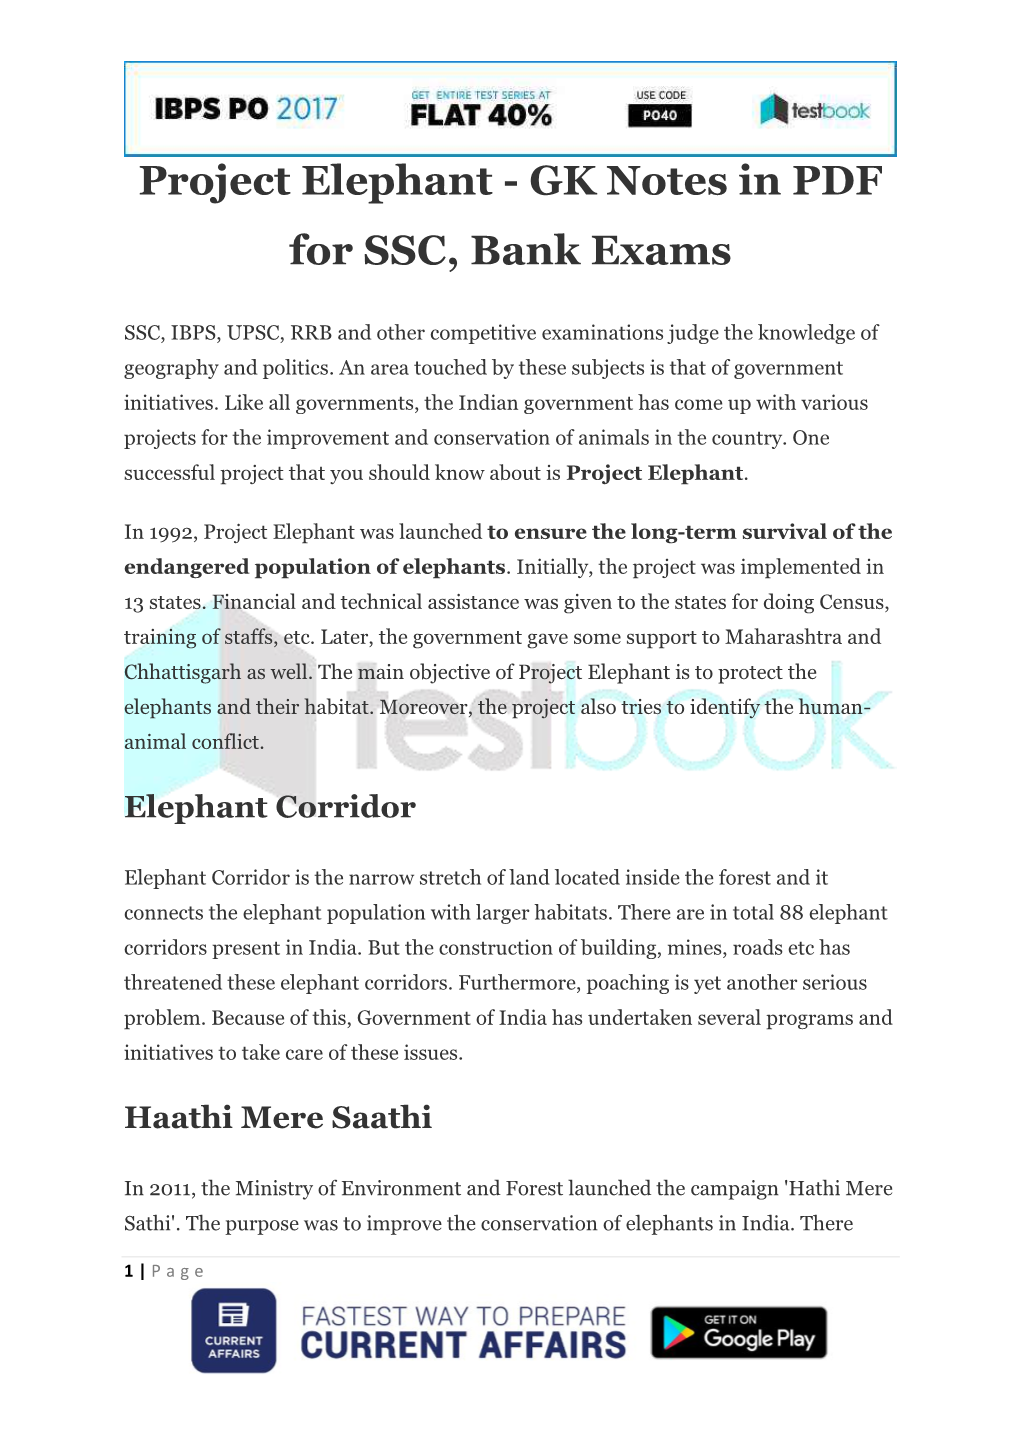 Project Elephant - GK Notes in PDF for SSC, Bank Exams